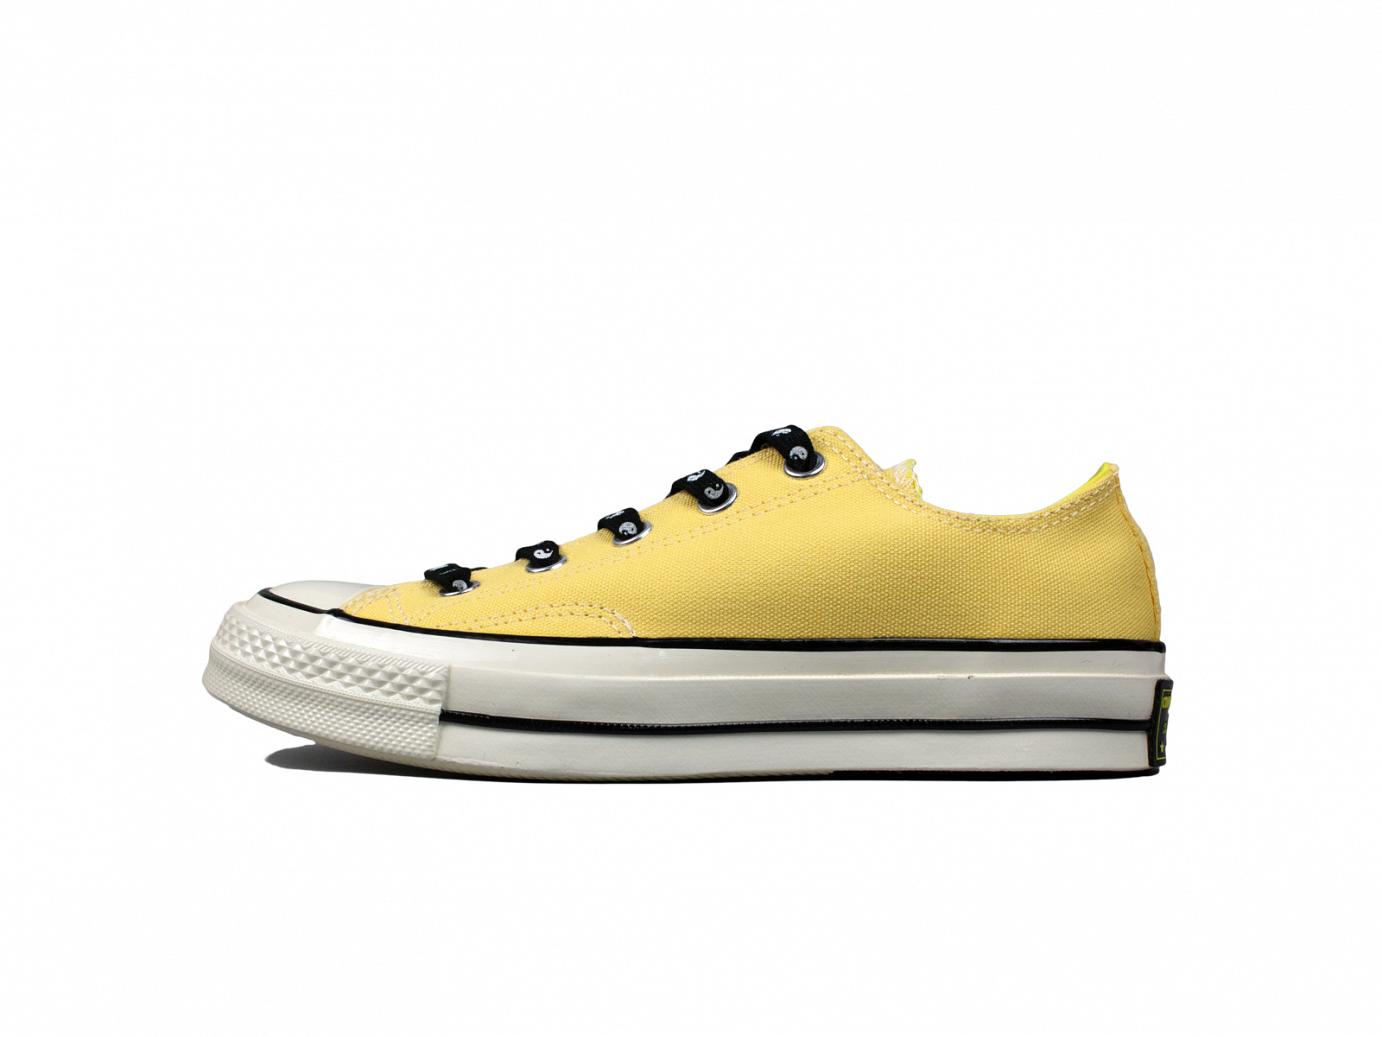 chuck taylor all star 70 ox butter yellow 164214c